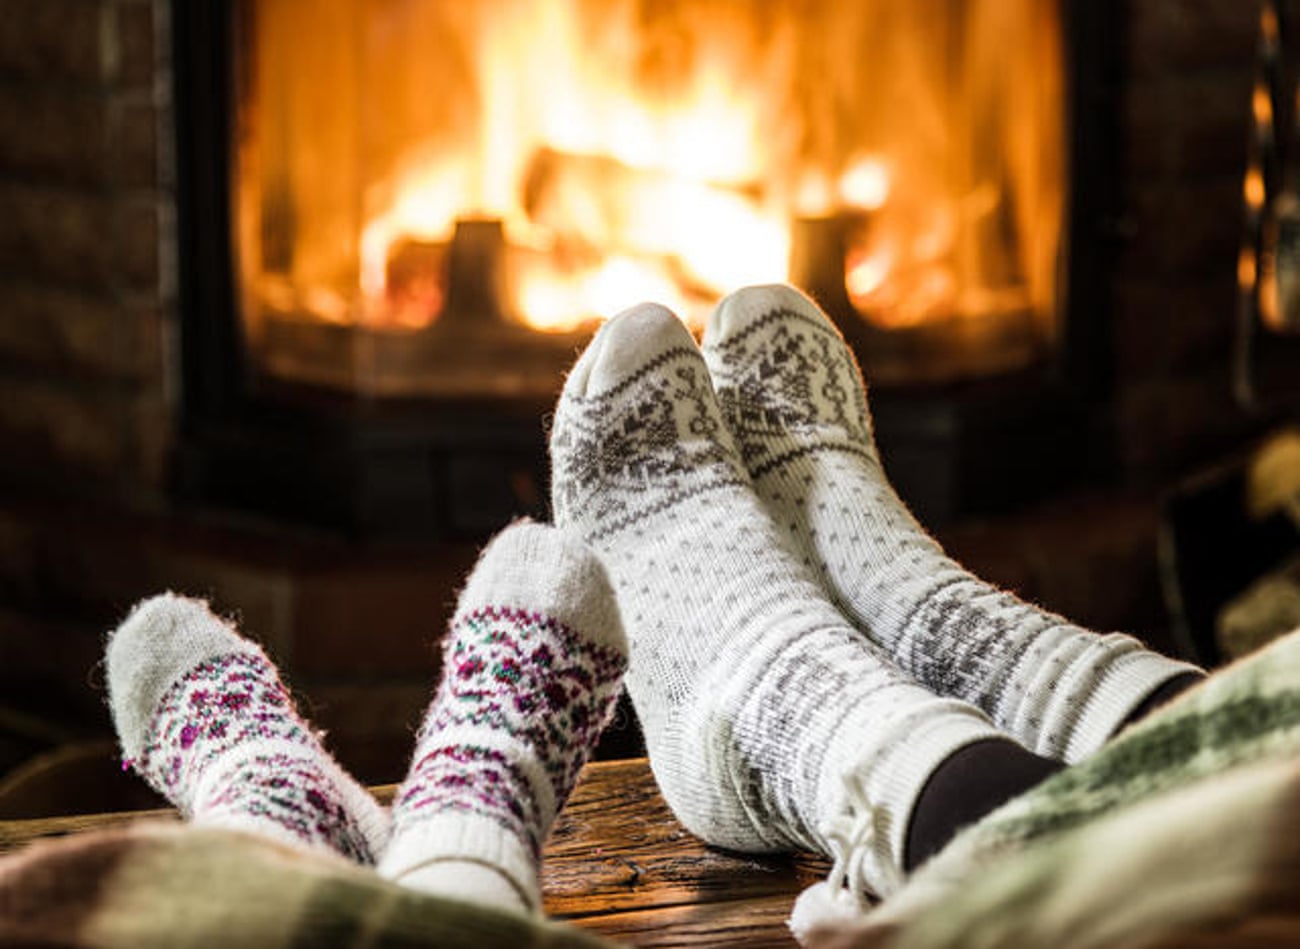 Handknitted socks are quintessentially hygge.